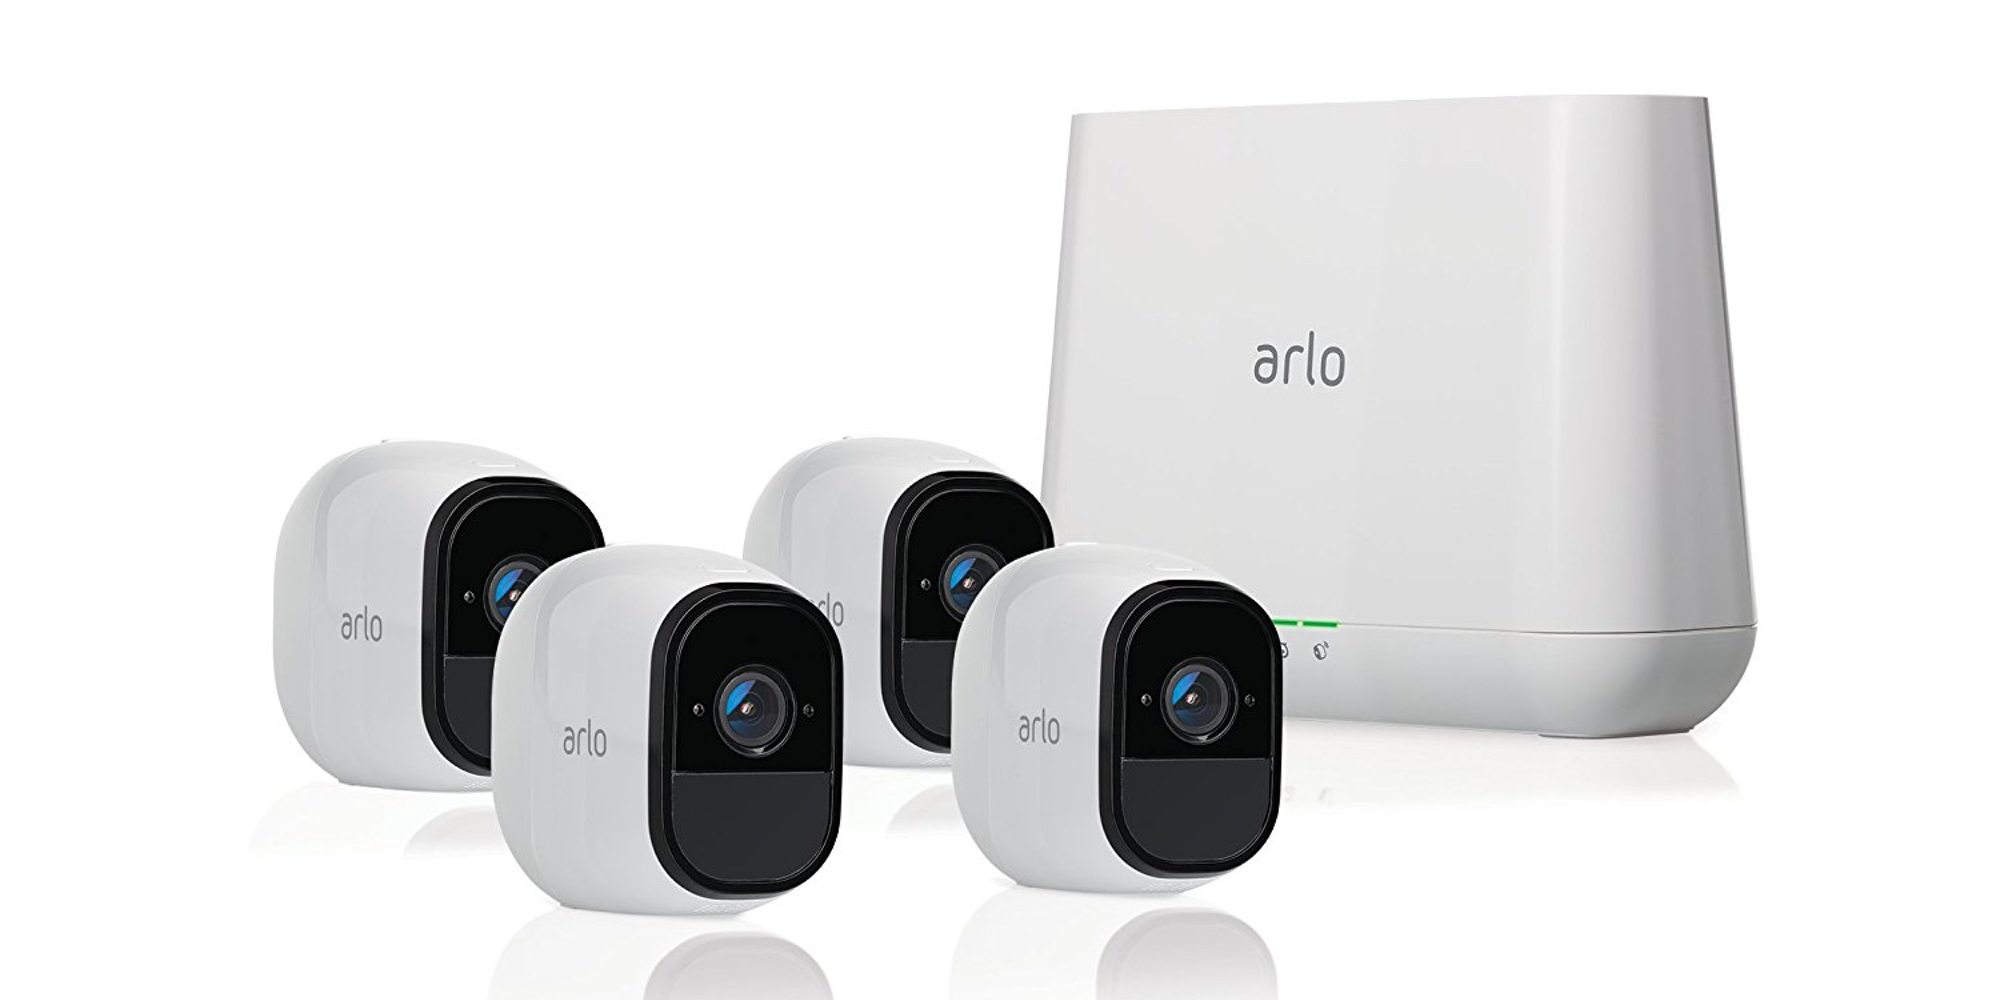 Best Buy has Arlo Camera bundles from $250 in its Early Black Friday to $220